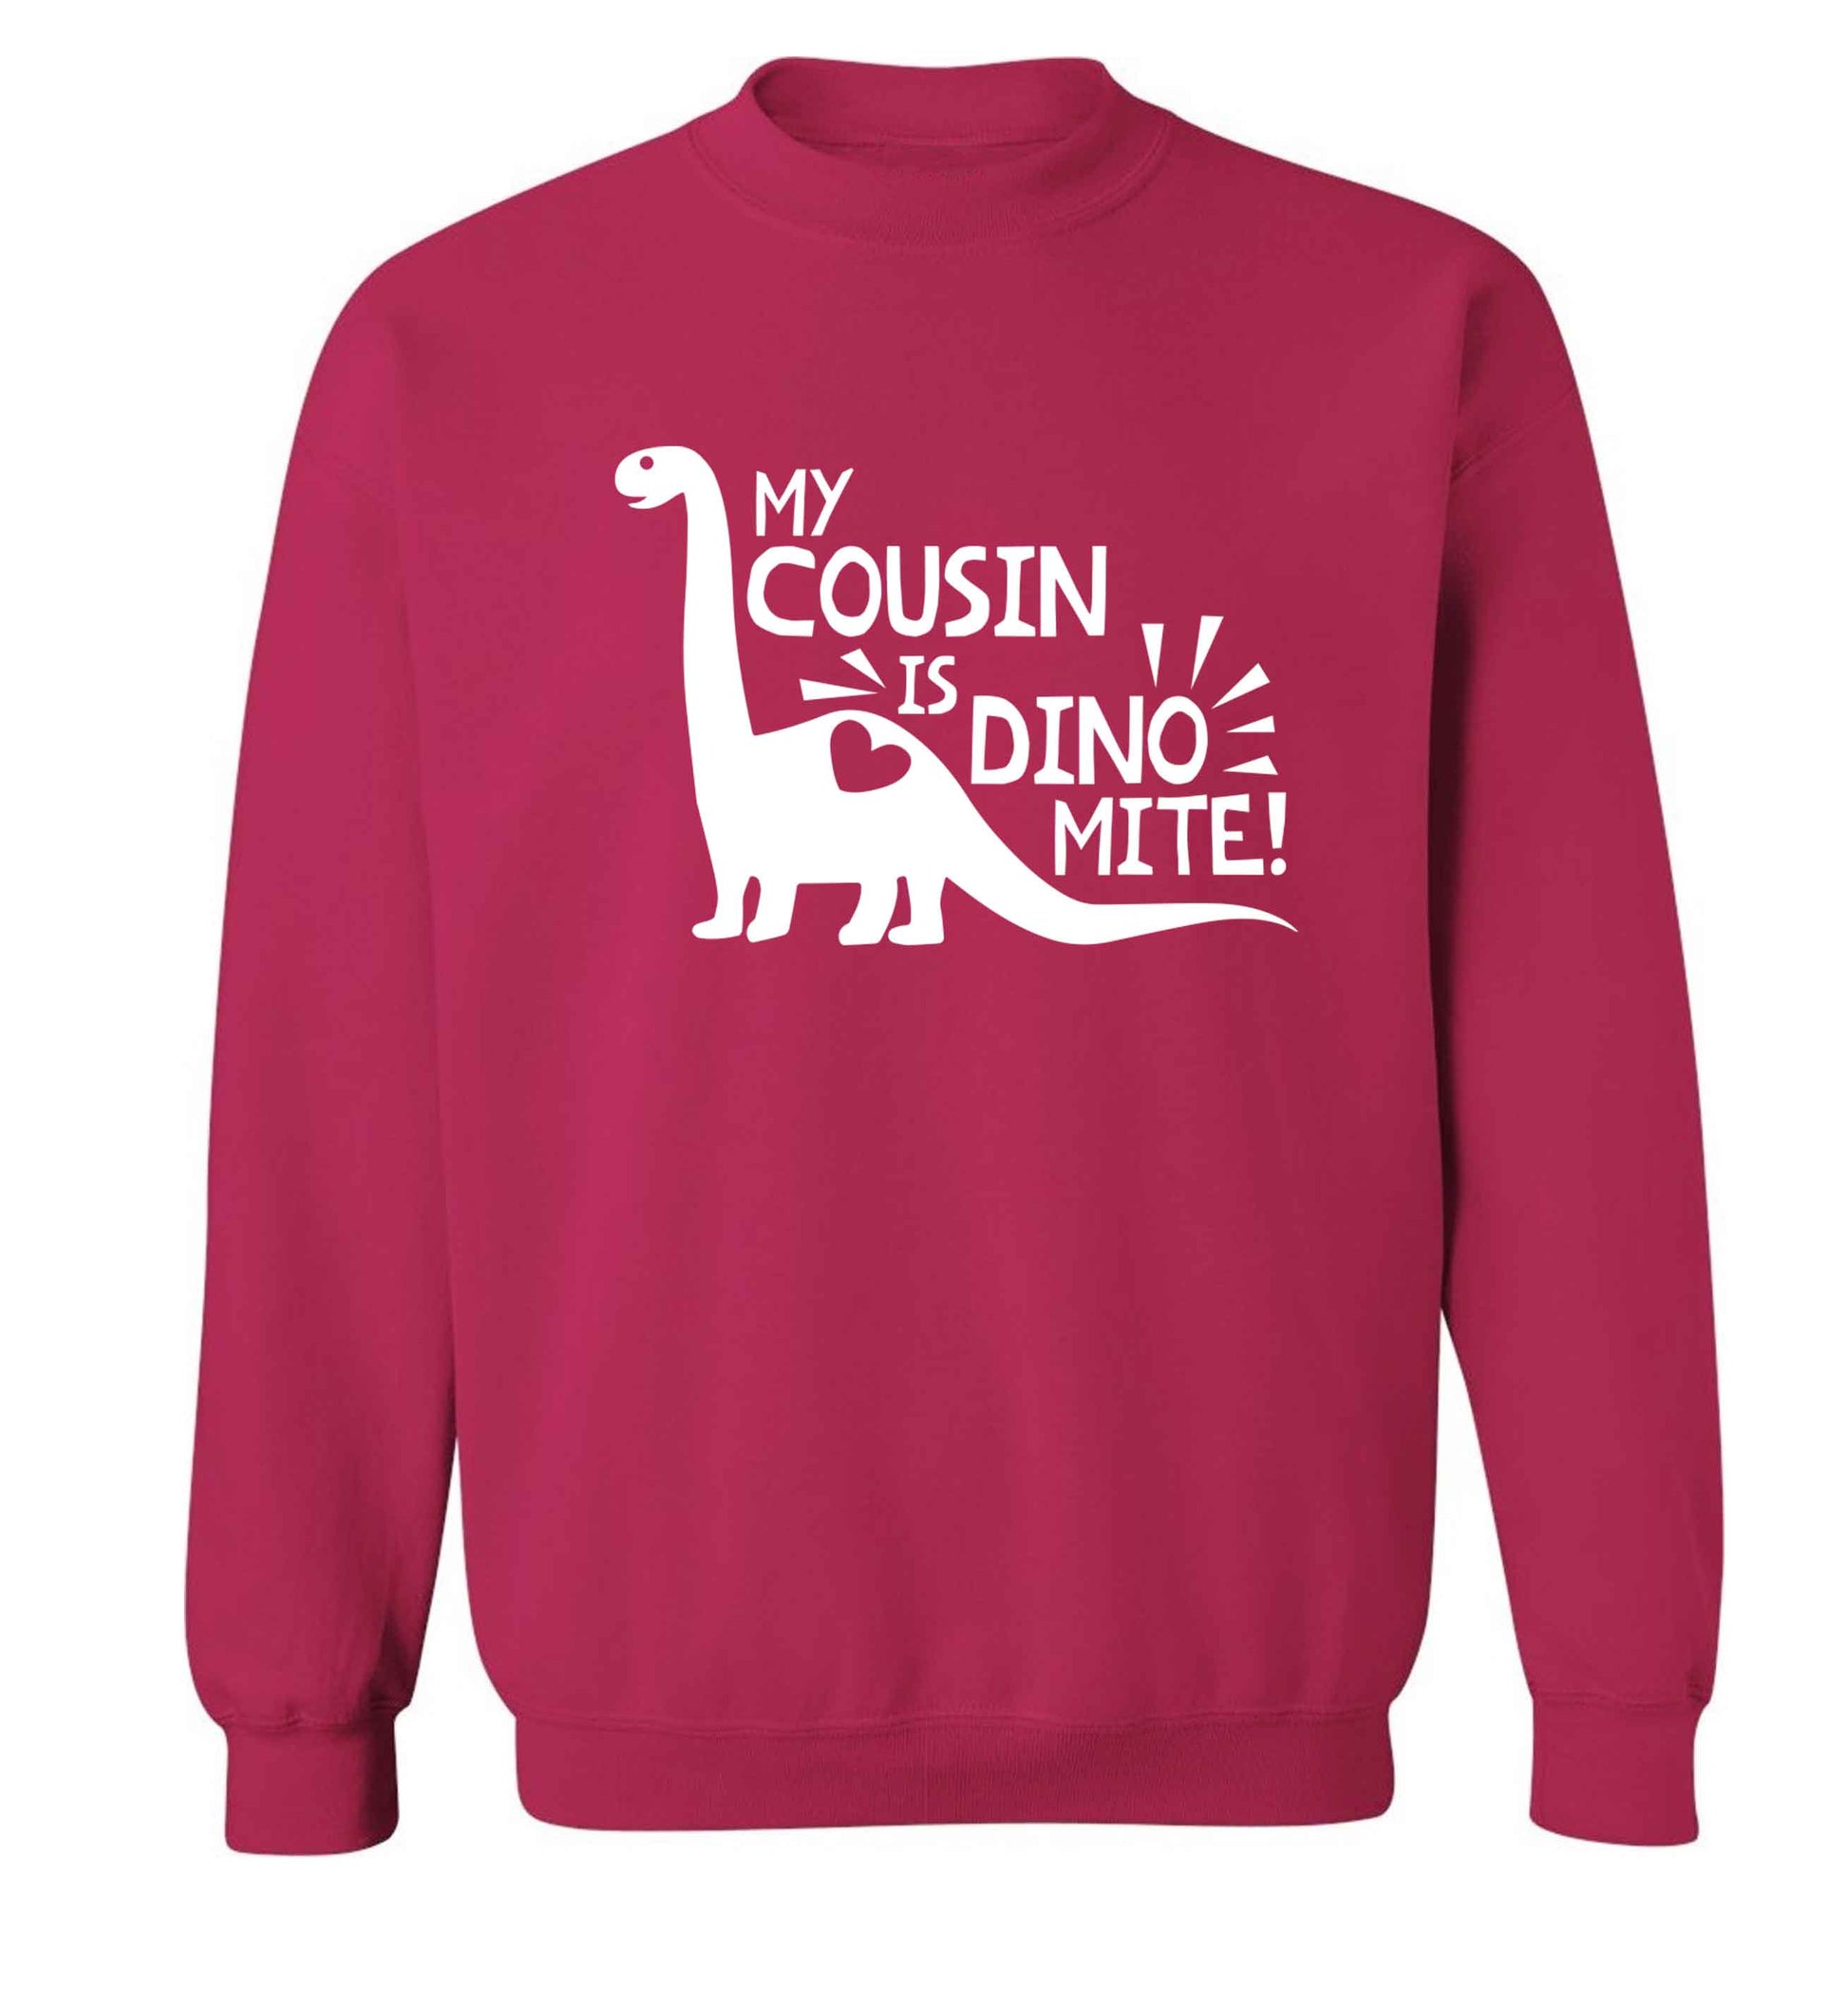 My cousin is dinomite! Adult's unisex pink Sweater 2XL